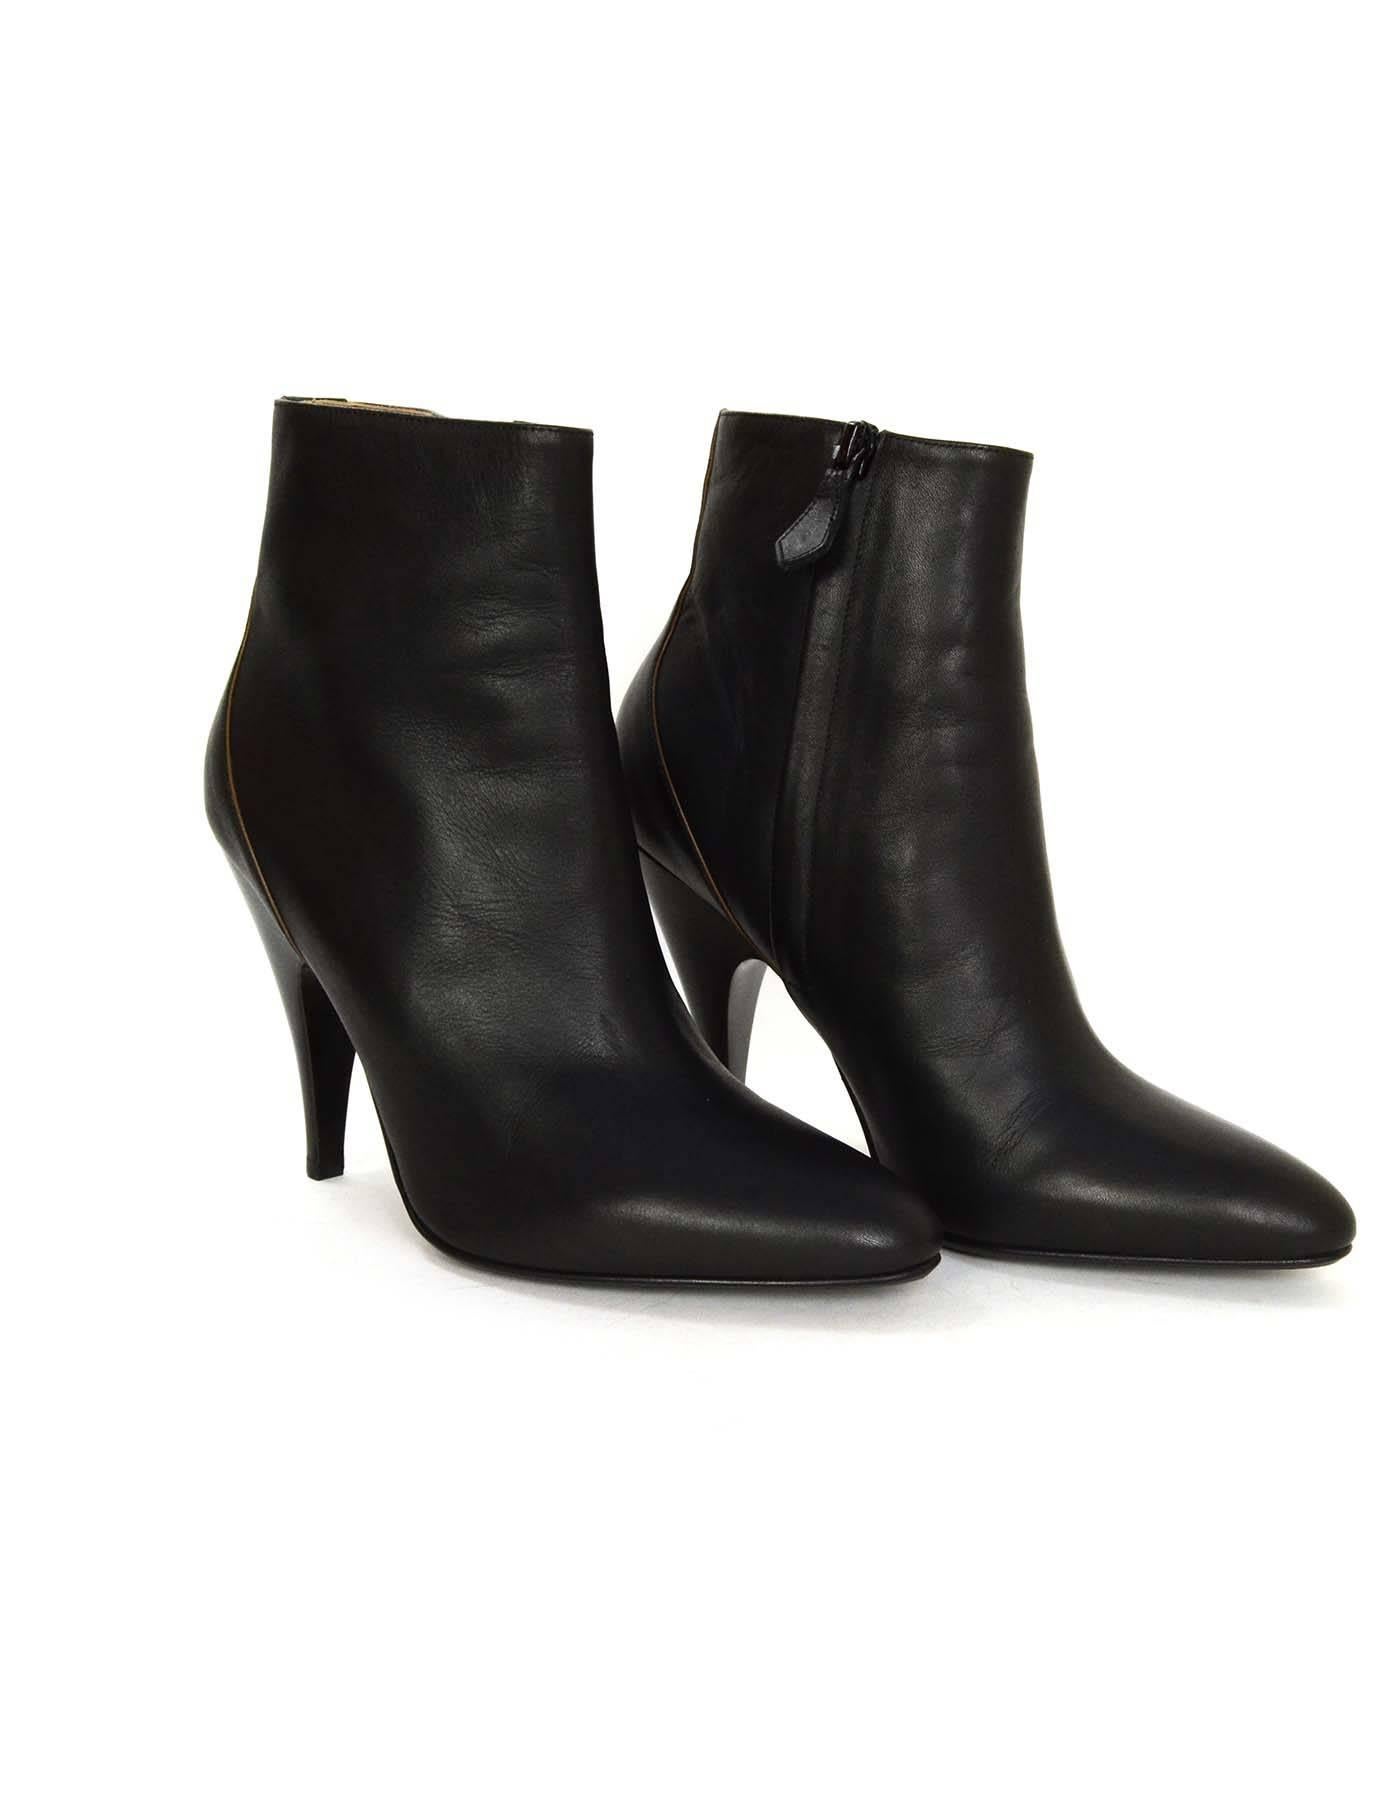 Women's Hermes Black Leather Ankle Booties sz 37